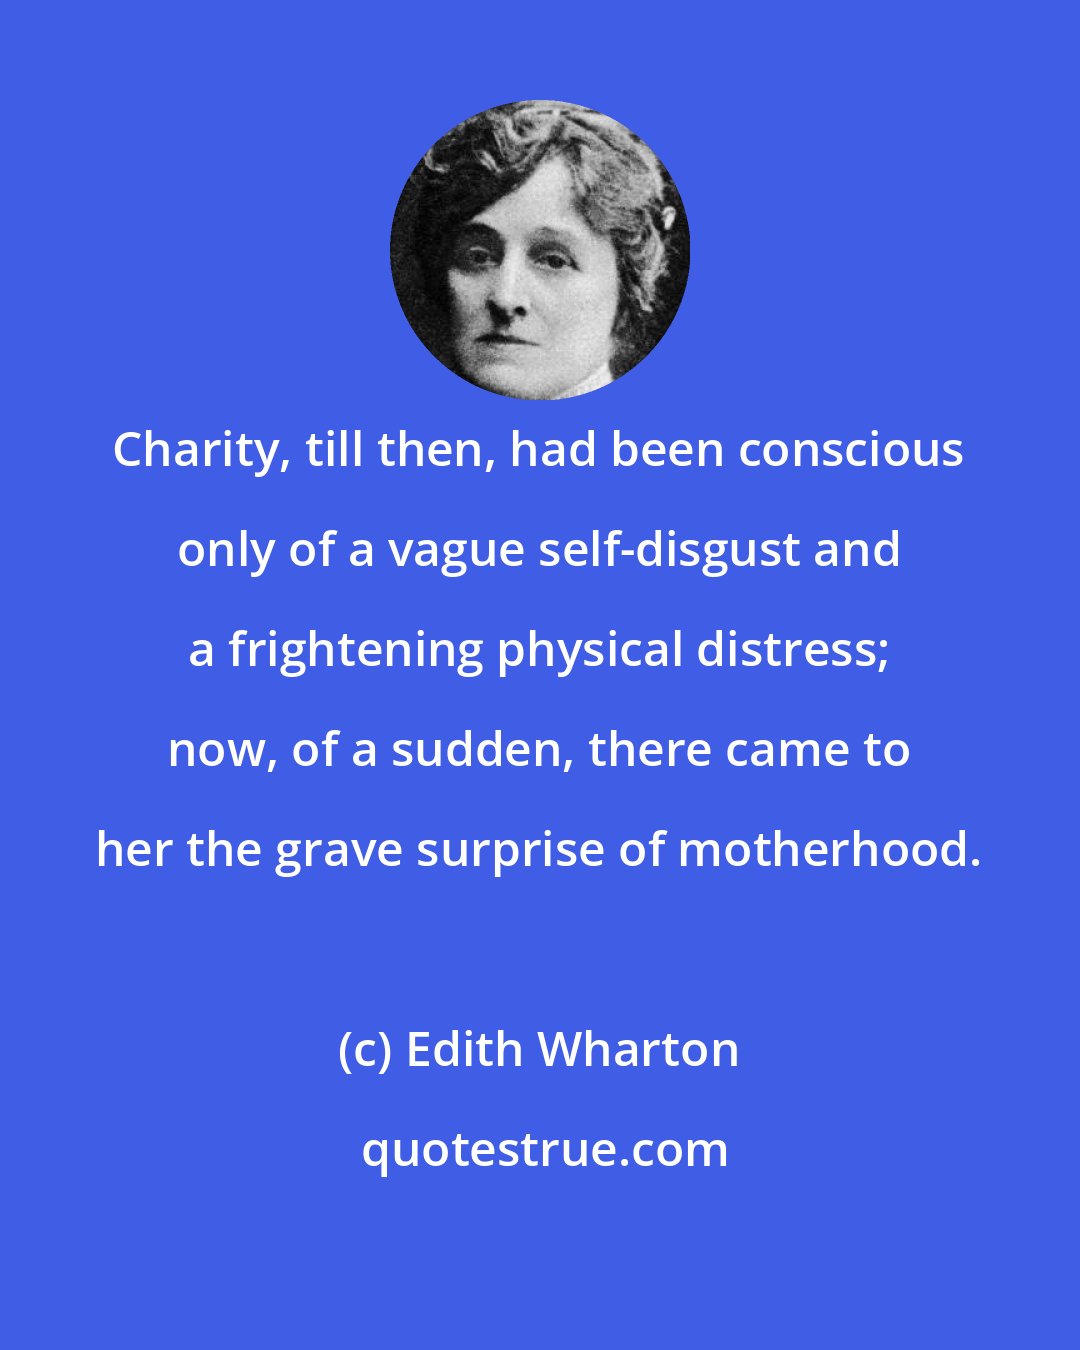 Edith Wharton: Charity, till then, had been conscious only of a vague self-disgust and a frightening physical distress; now, of a sudden, there came to her the grave surprise of motherhood.